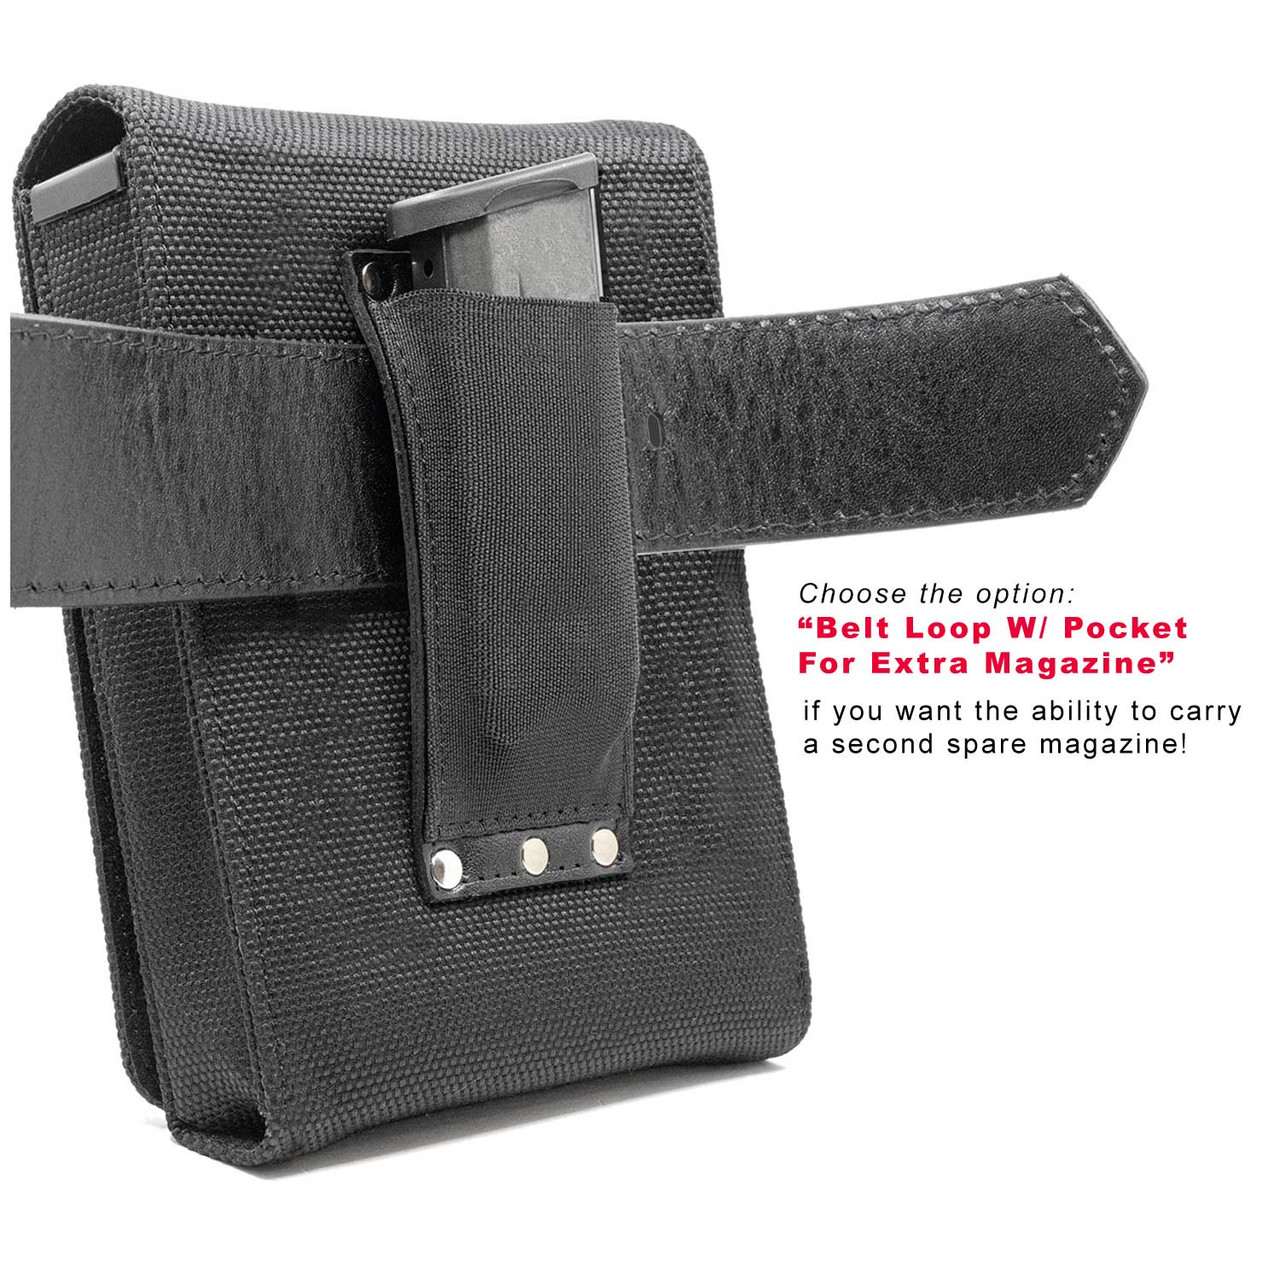 The Kahr S9 Xtra Mag Black Leather Holster